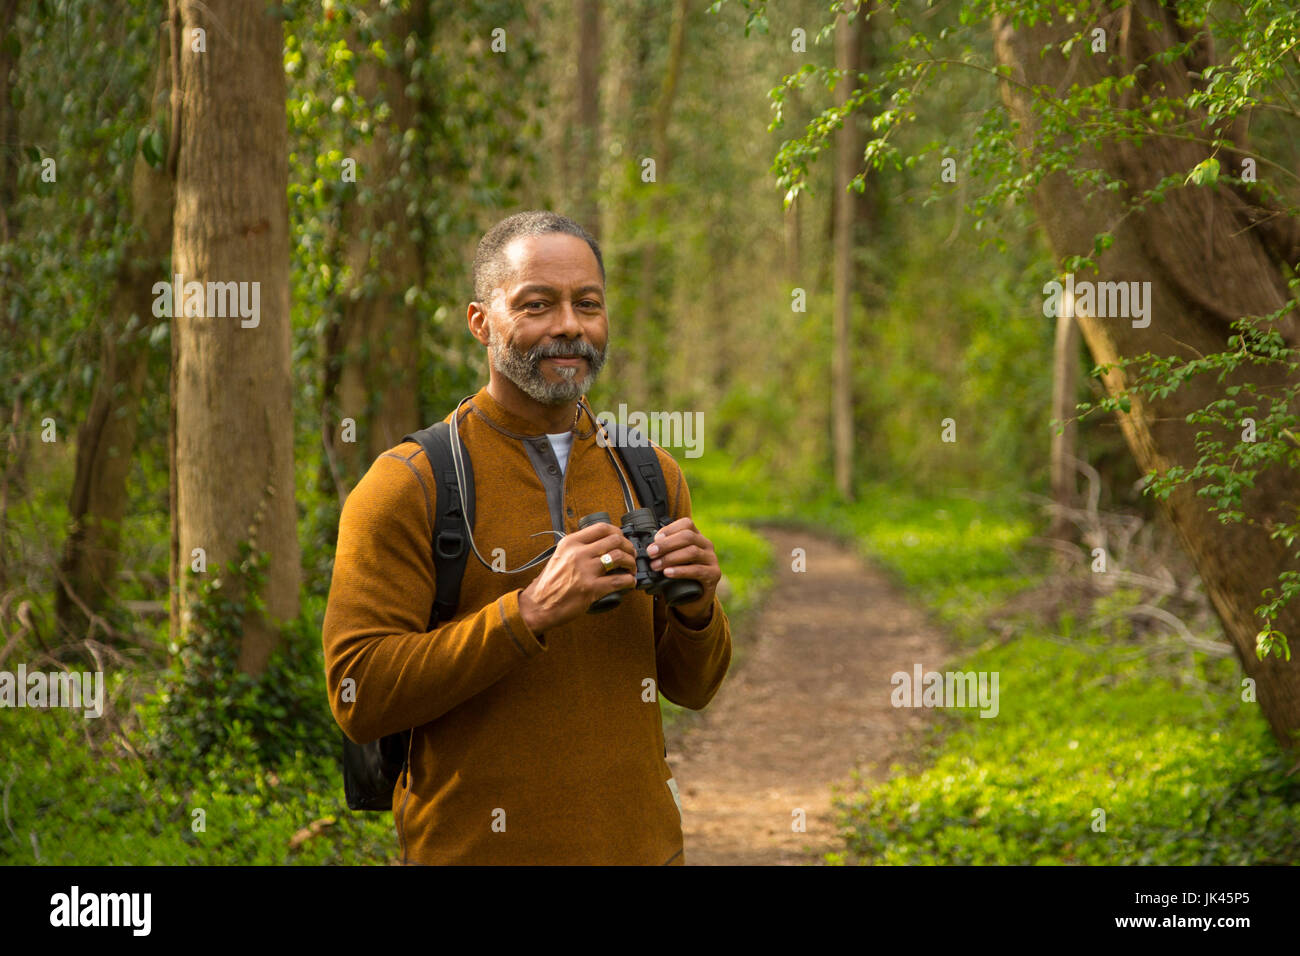 African American man standing on path in forest holding binoculars Stock Photo